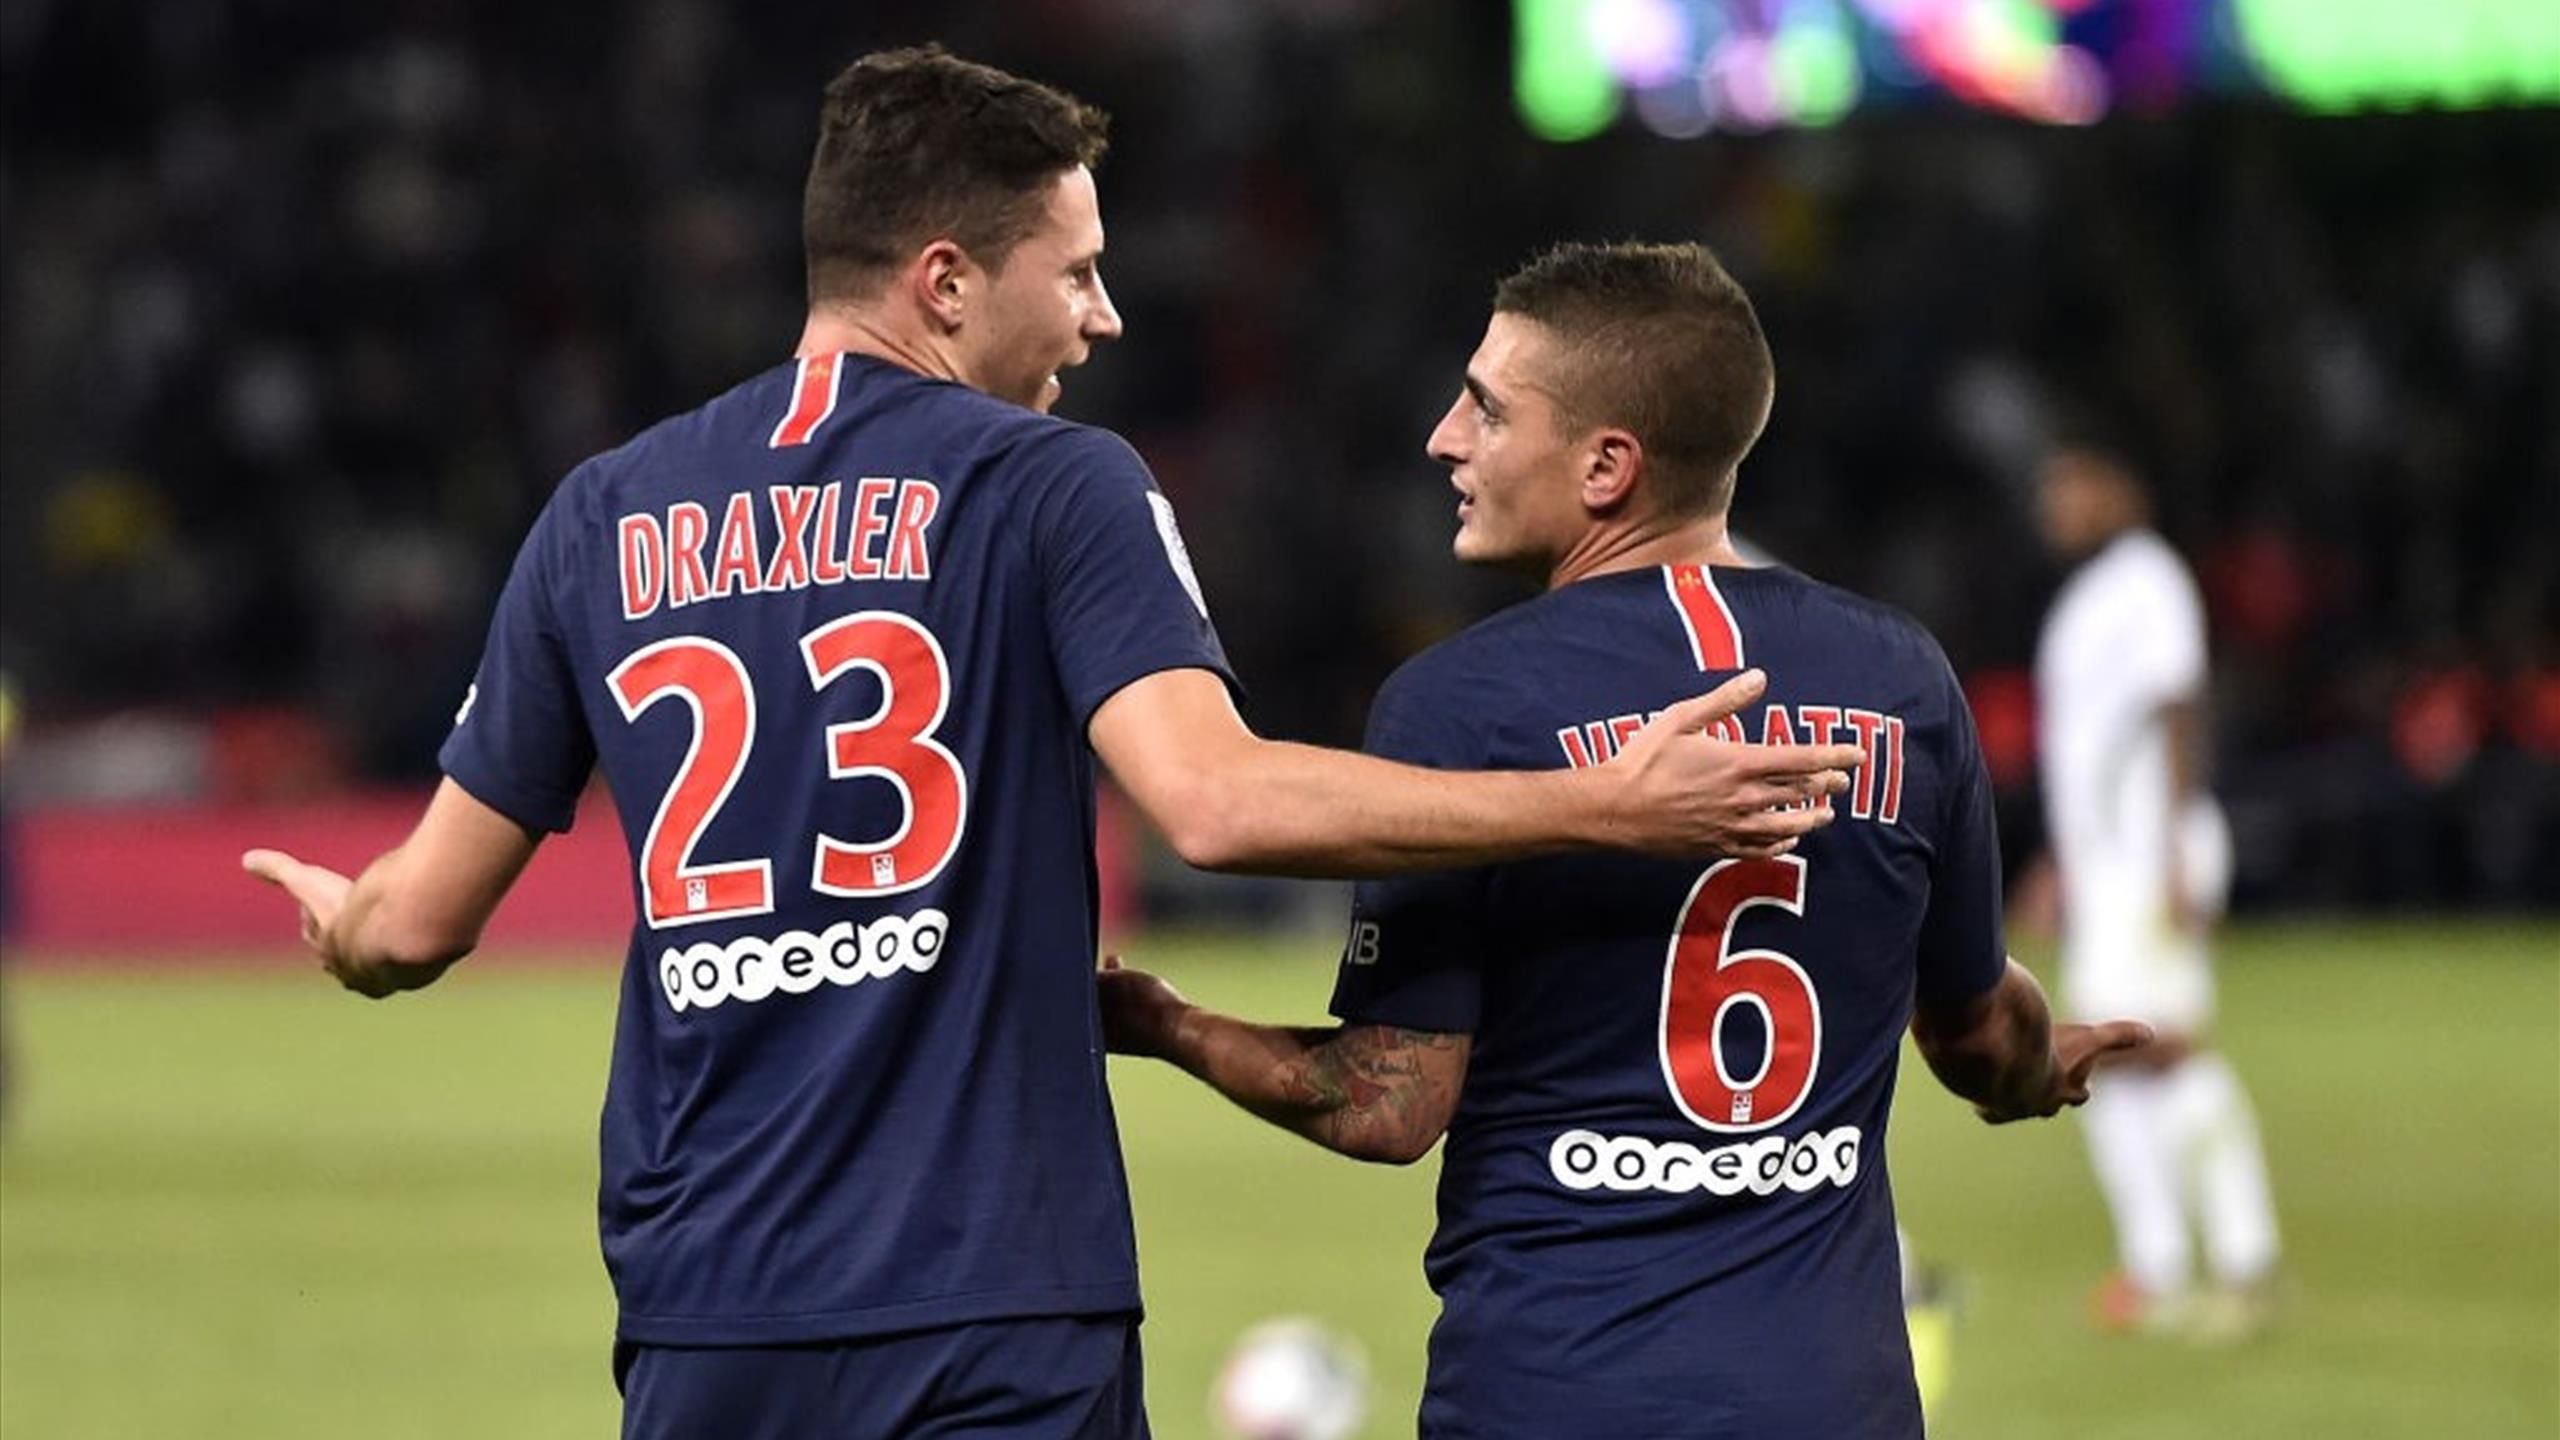 UEFA Opens Investigation as PSG Transfers Players to Qatar: A Possible Conflict of Interest?